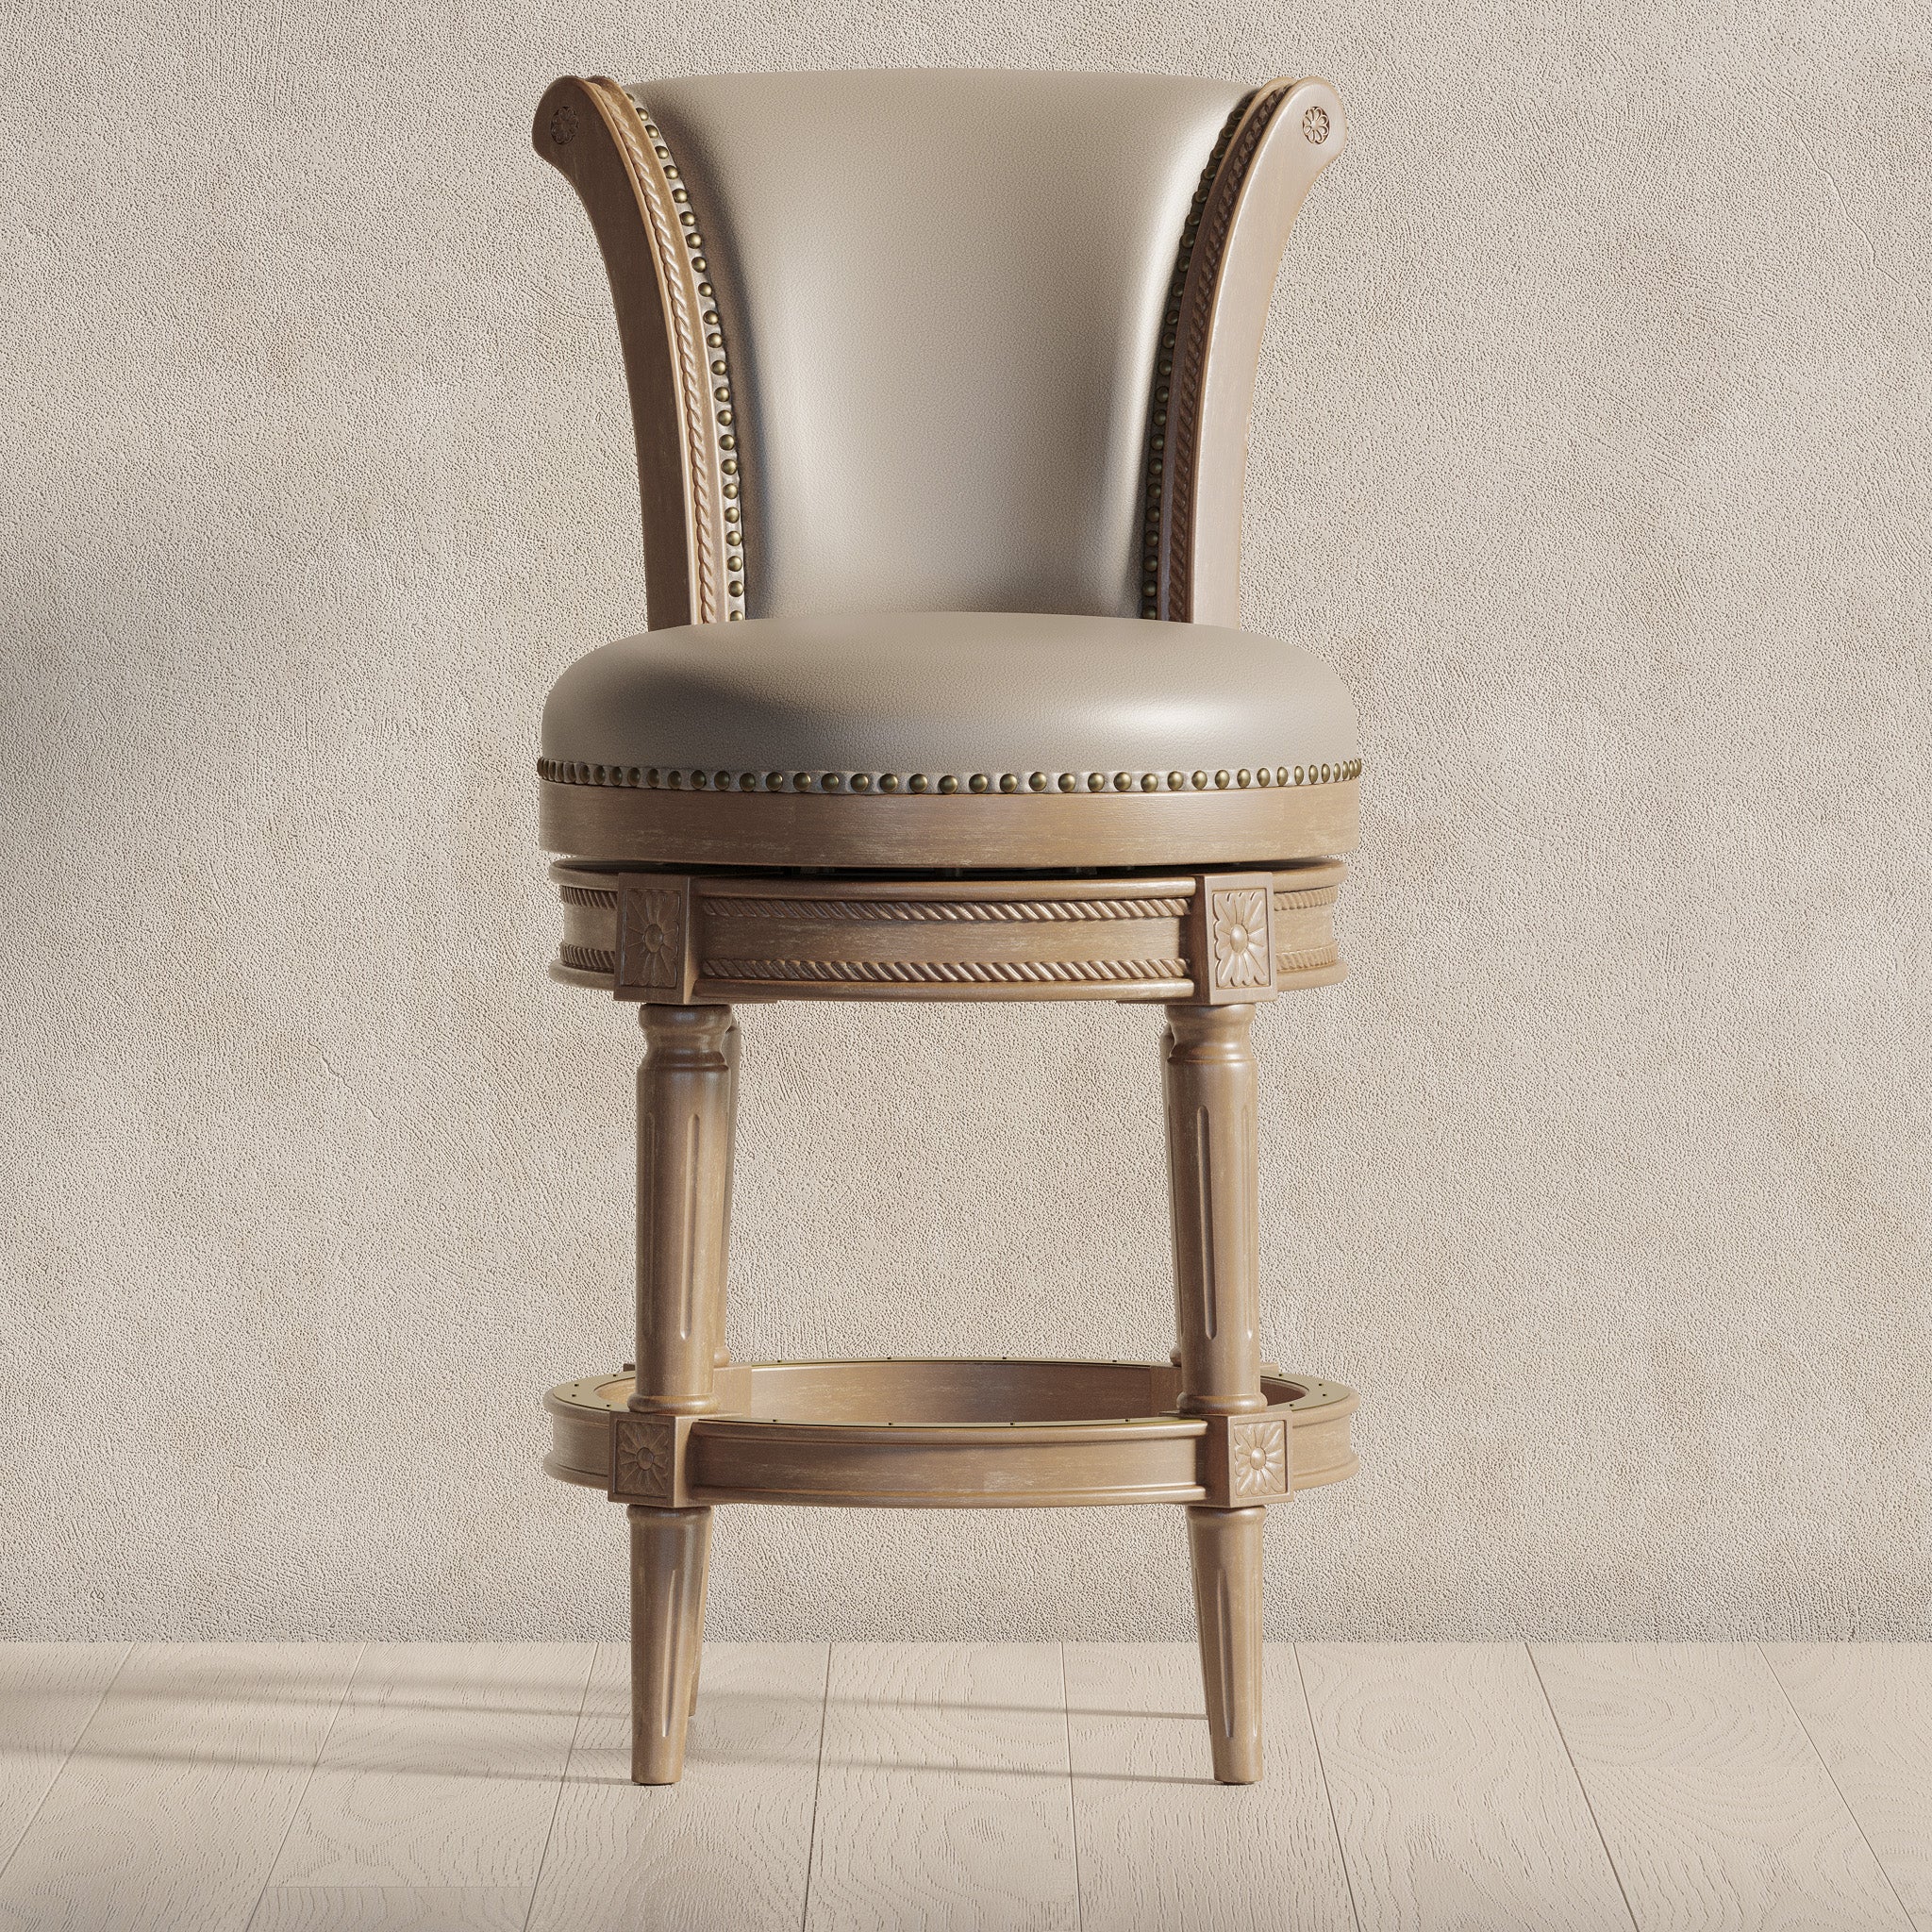 Pullman Counter Stool in Weathered Oak Finish with Avanti Bone Vegan Leather in Stools by Maven Lane